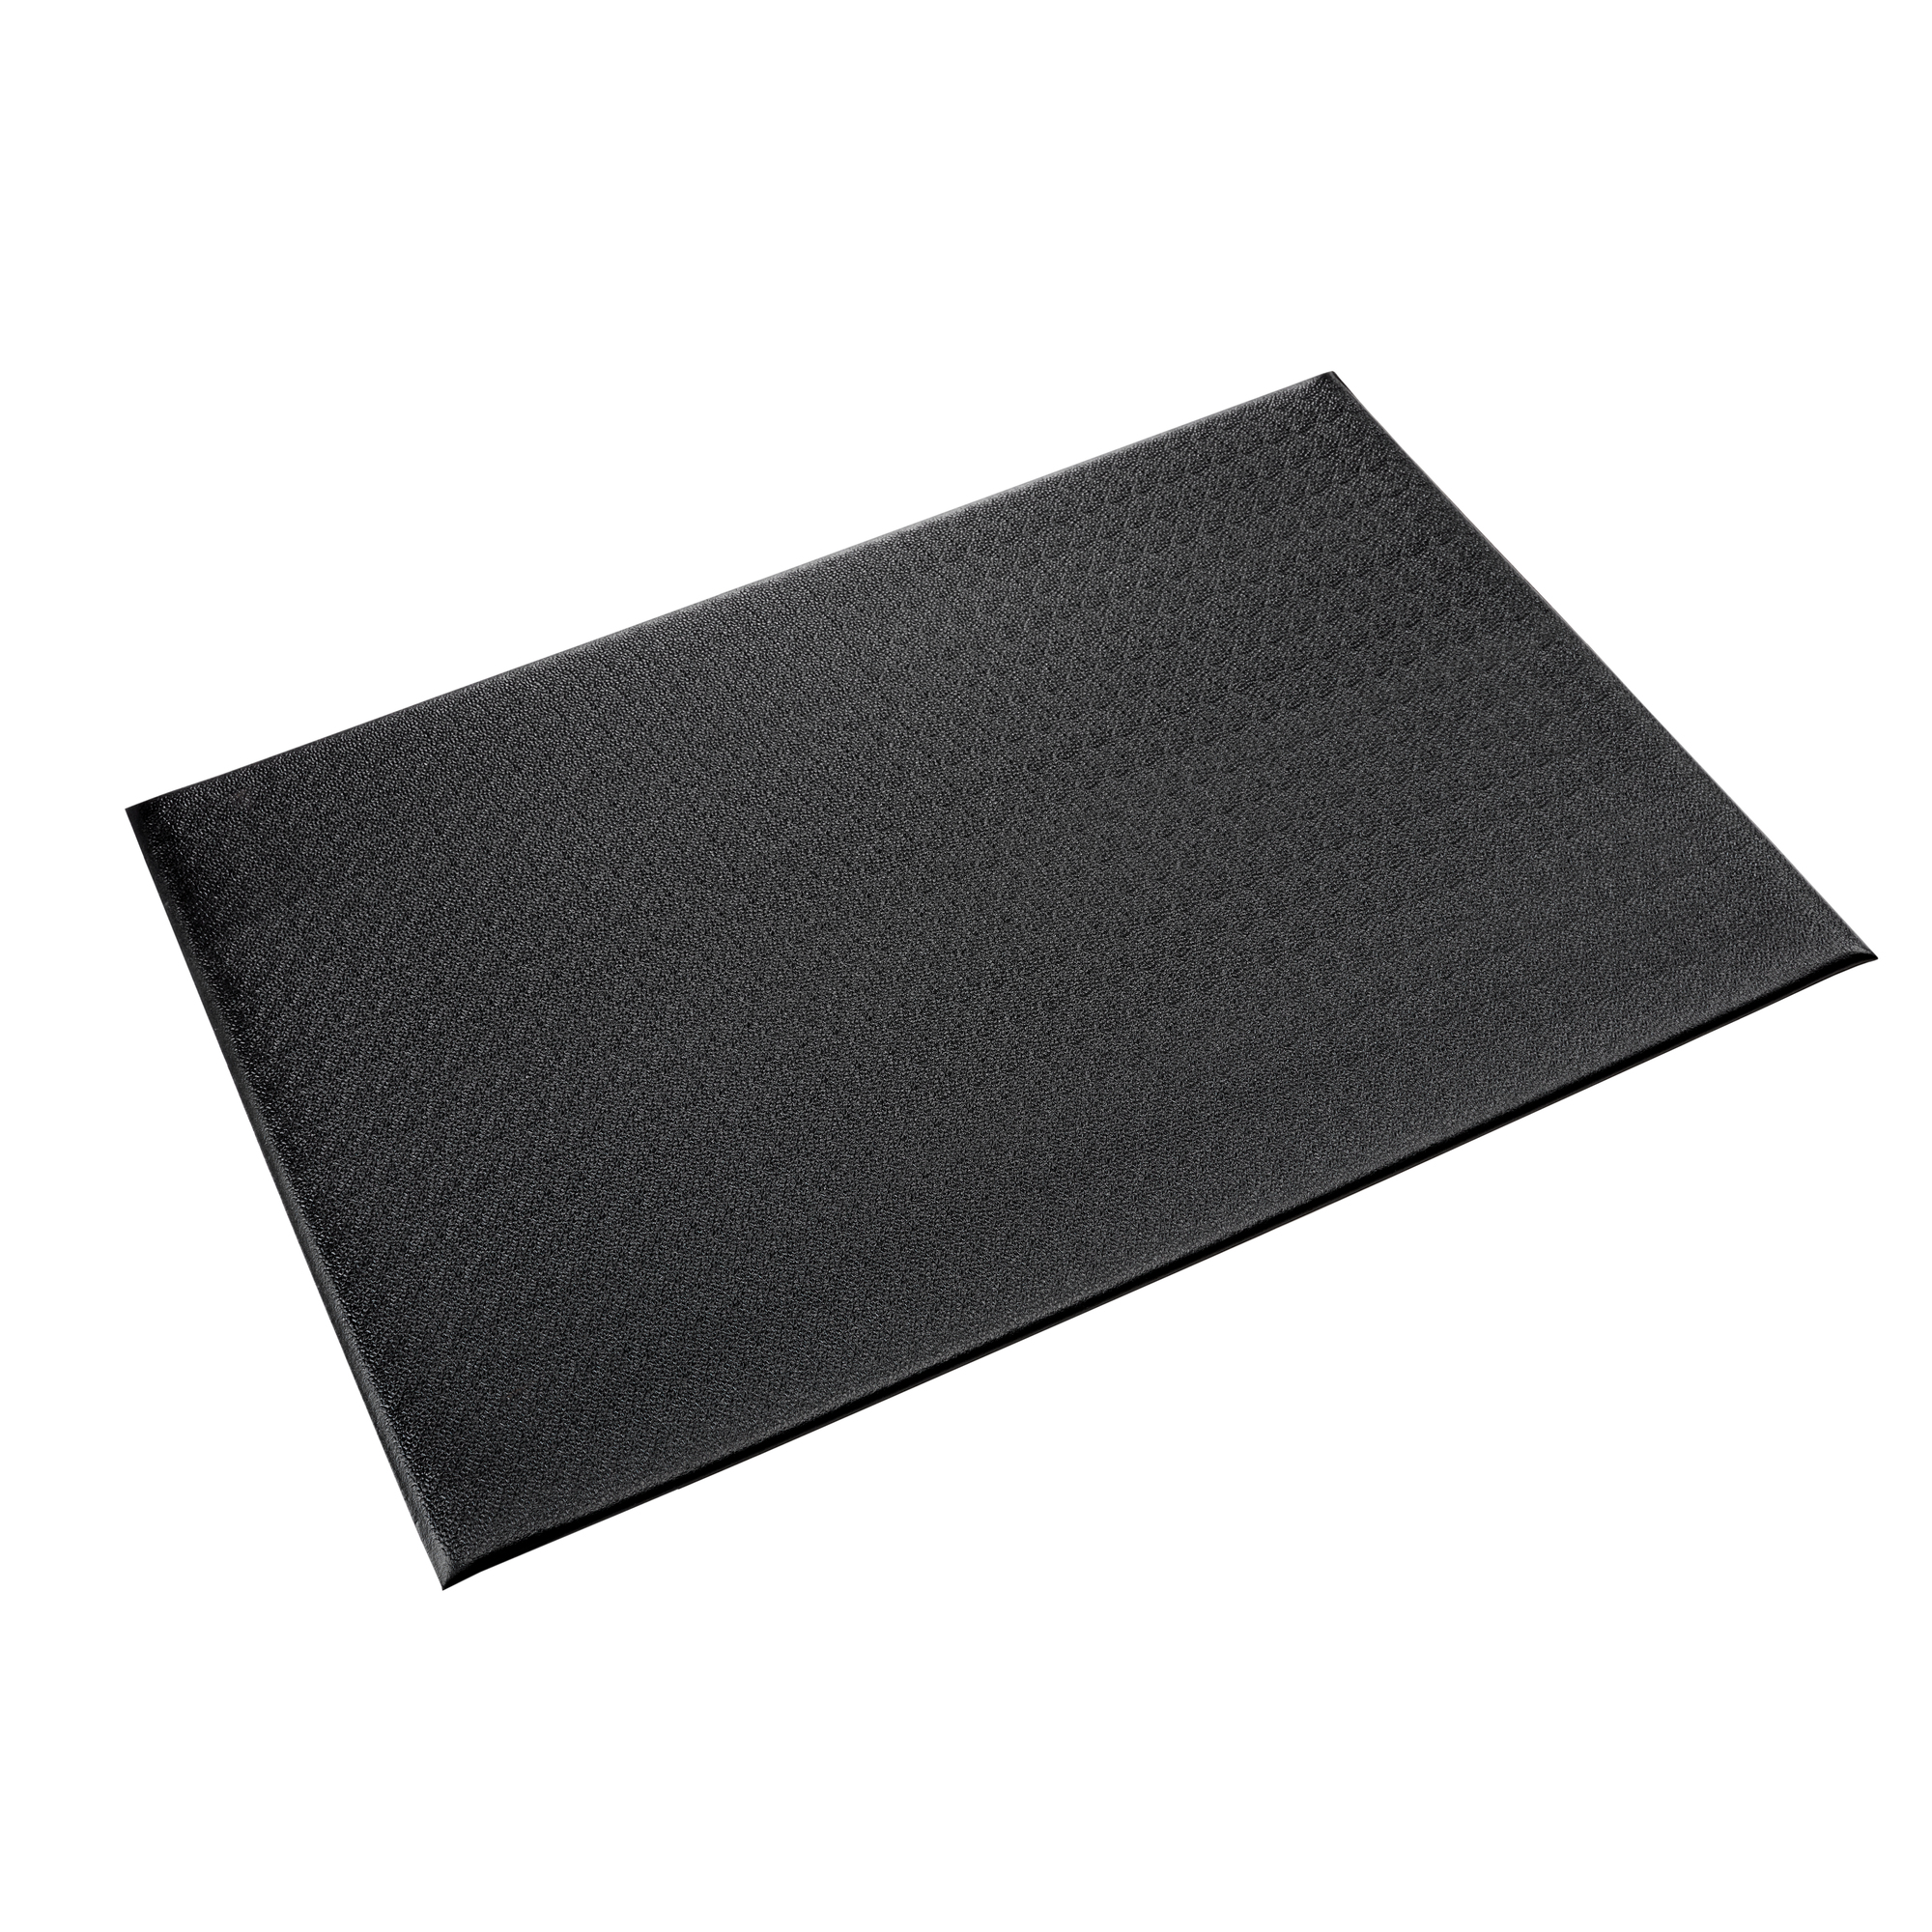 Crown Matting Technologies, Comfort-King 1/2 3ft.x5ft. Black, Width 36 in, Length 60 in, Thickness 1/2 in, Model K4 0035BK